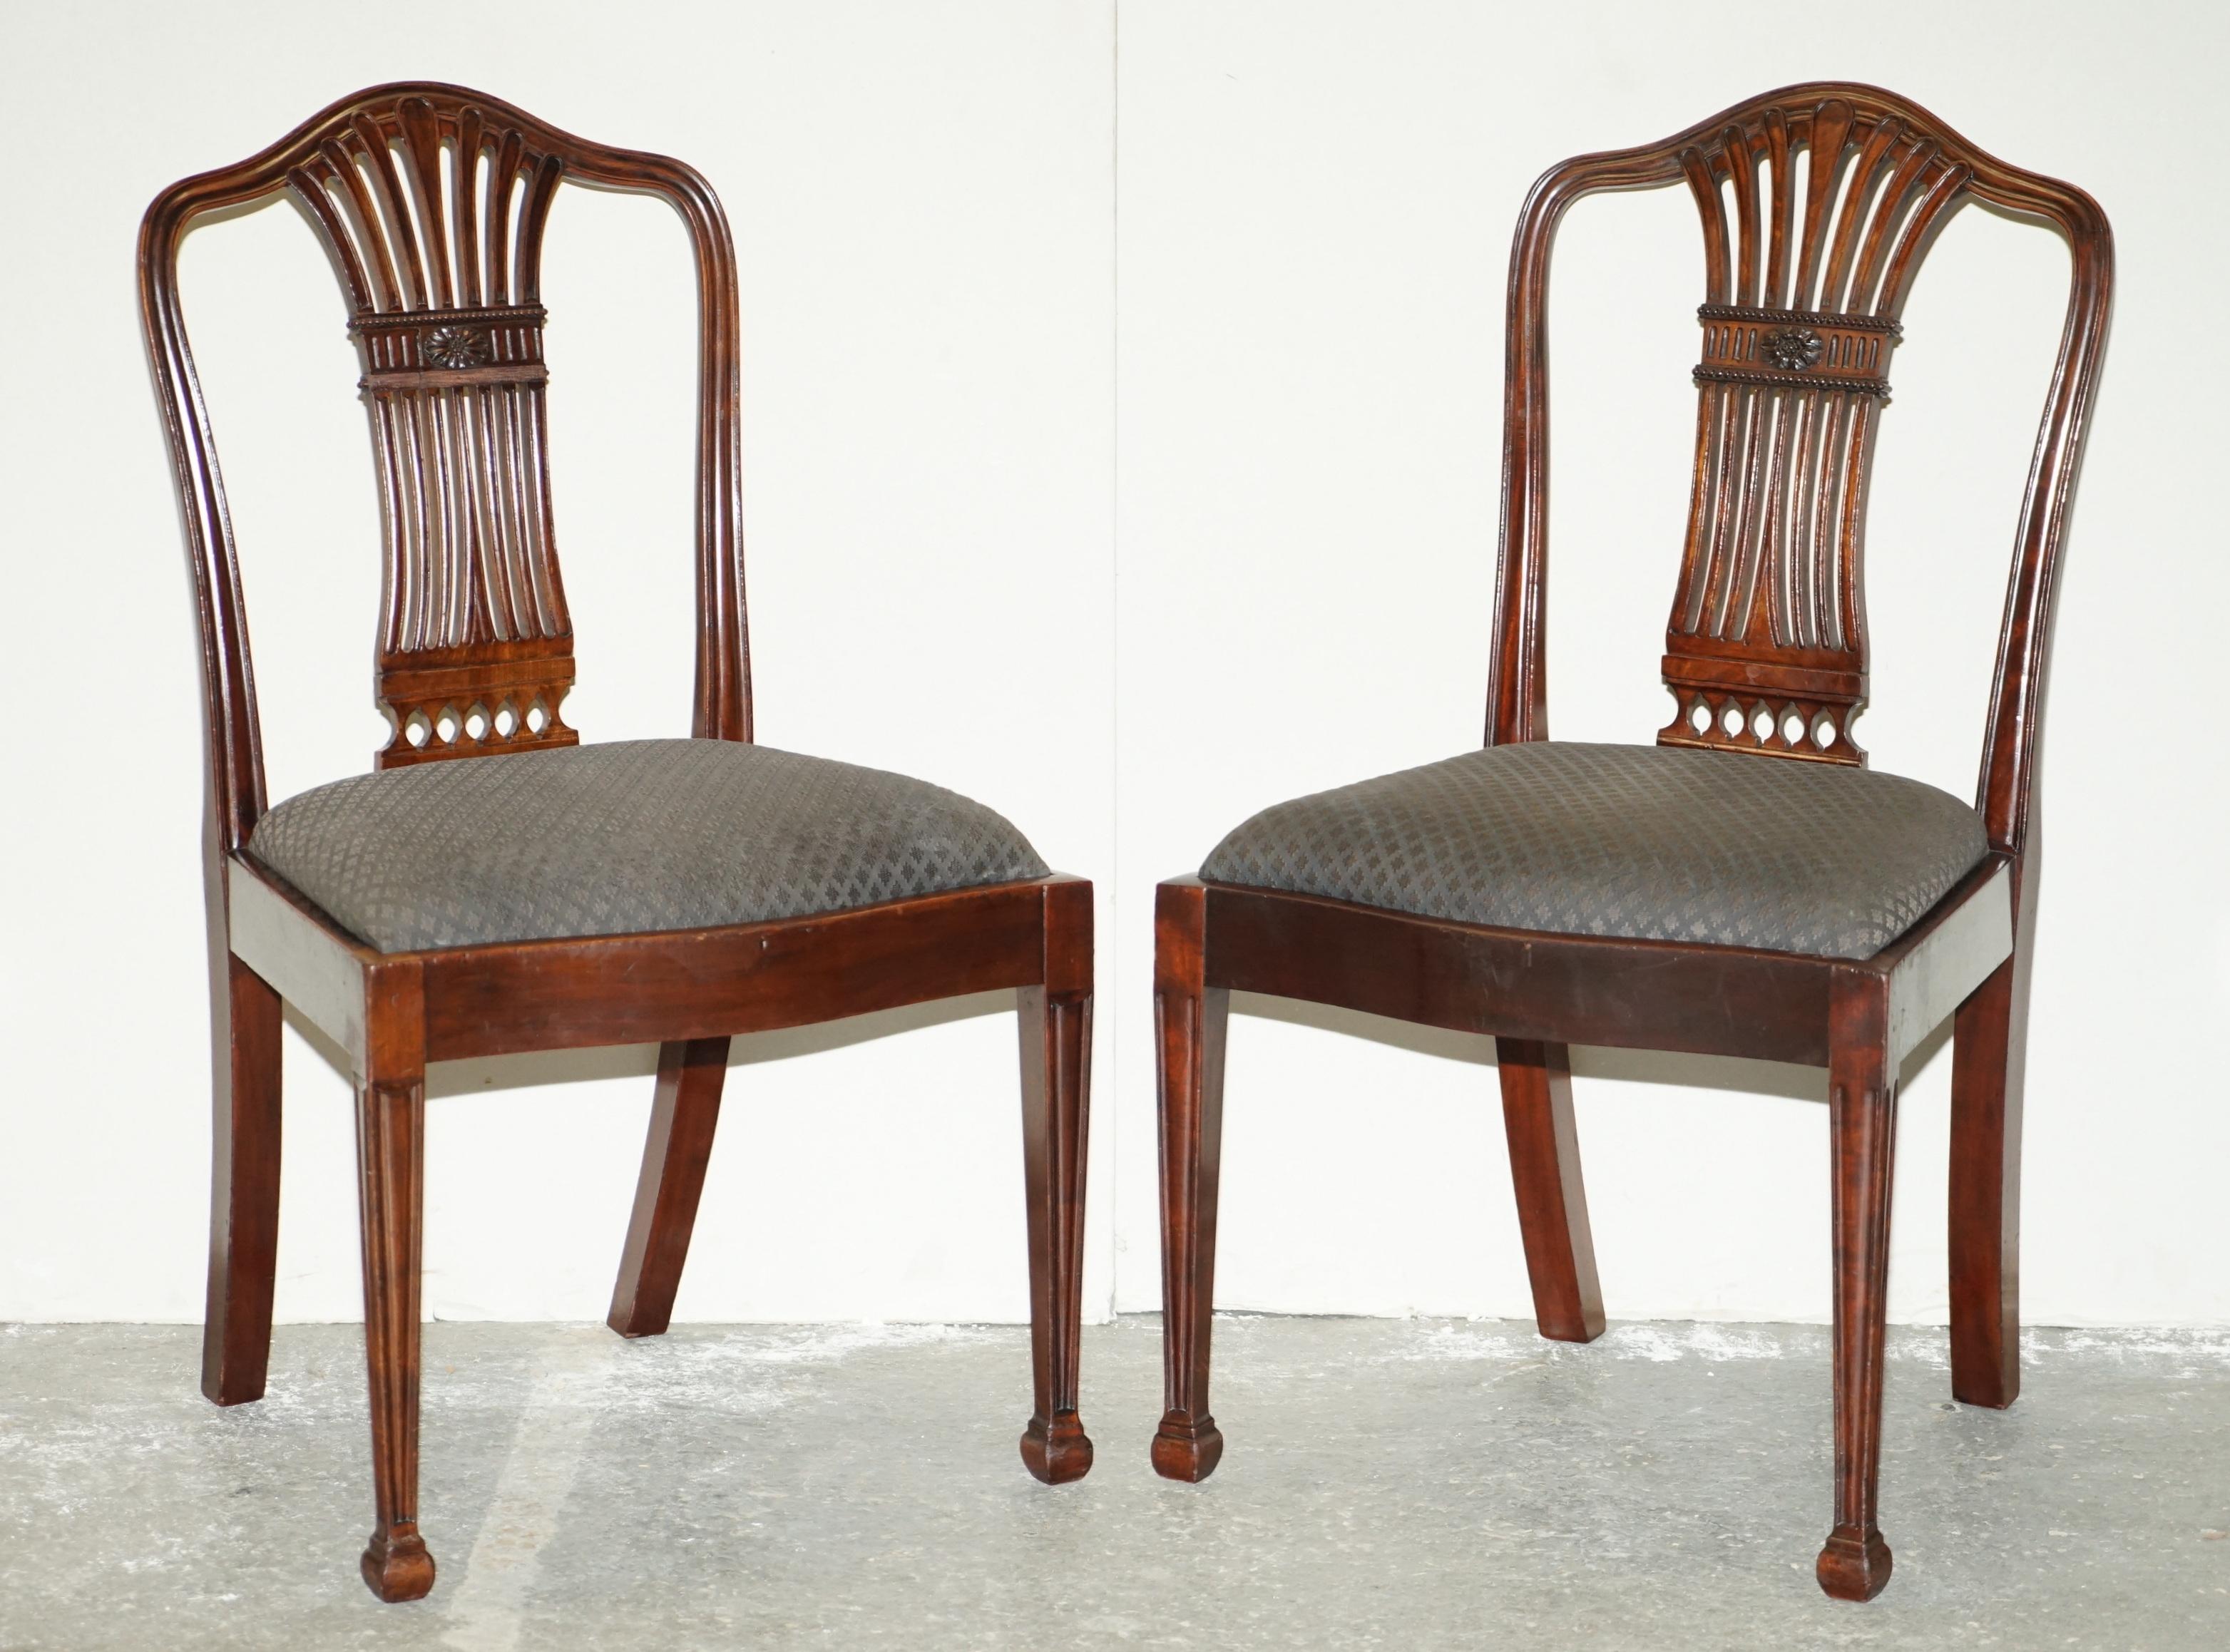 8 Antique George Hepplewhite Style Dining Chairs from Lady Diana's Spencer House For Sale 6